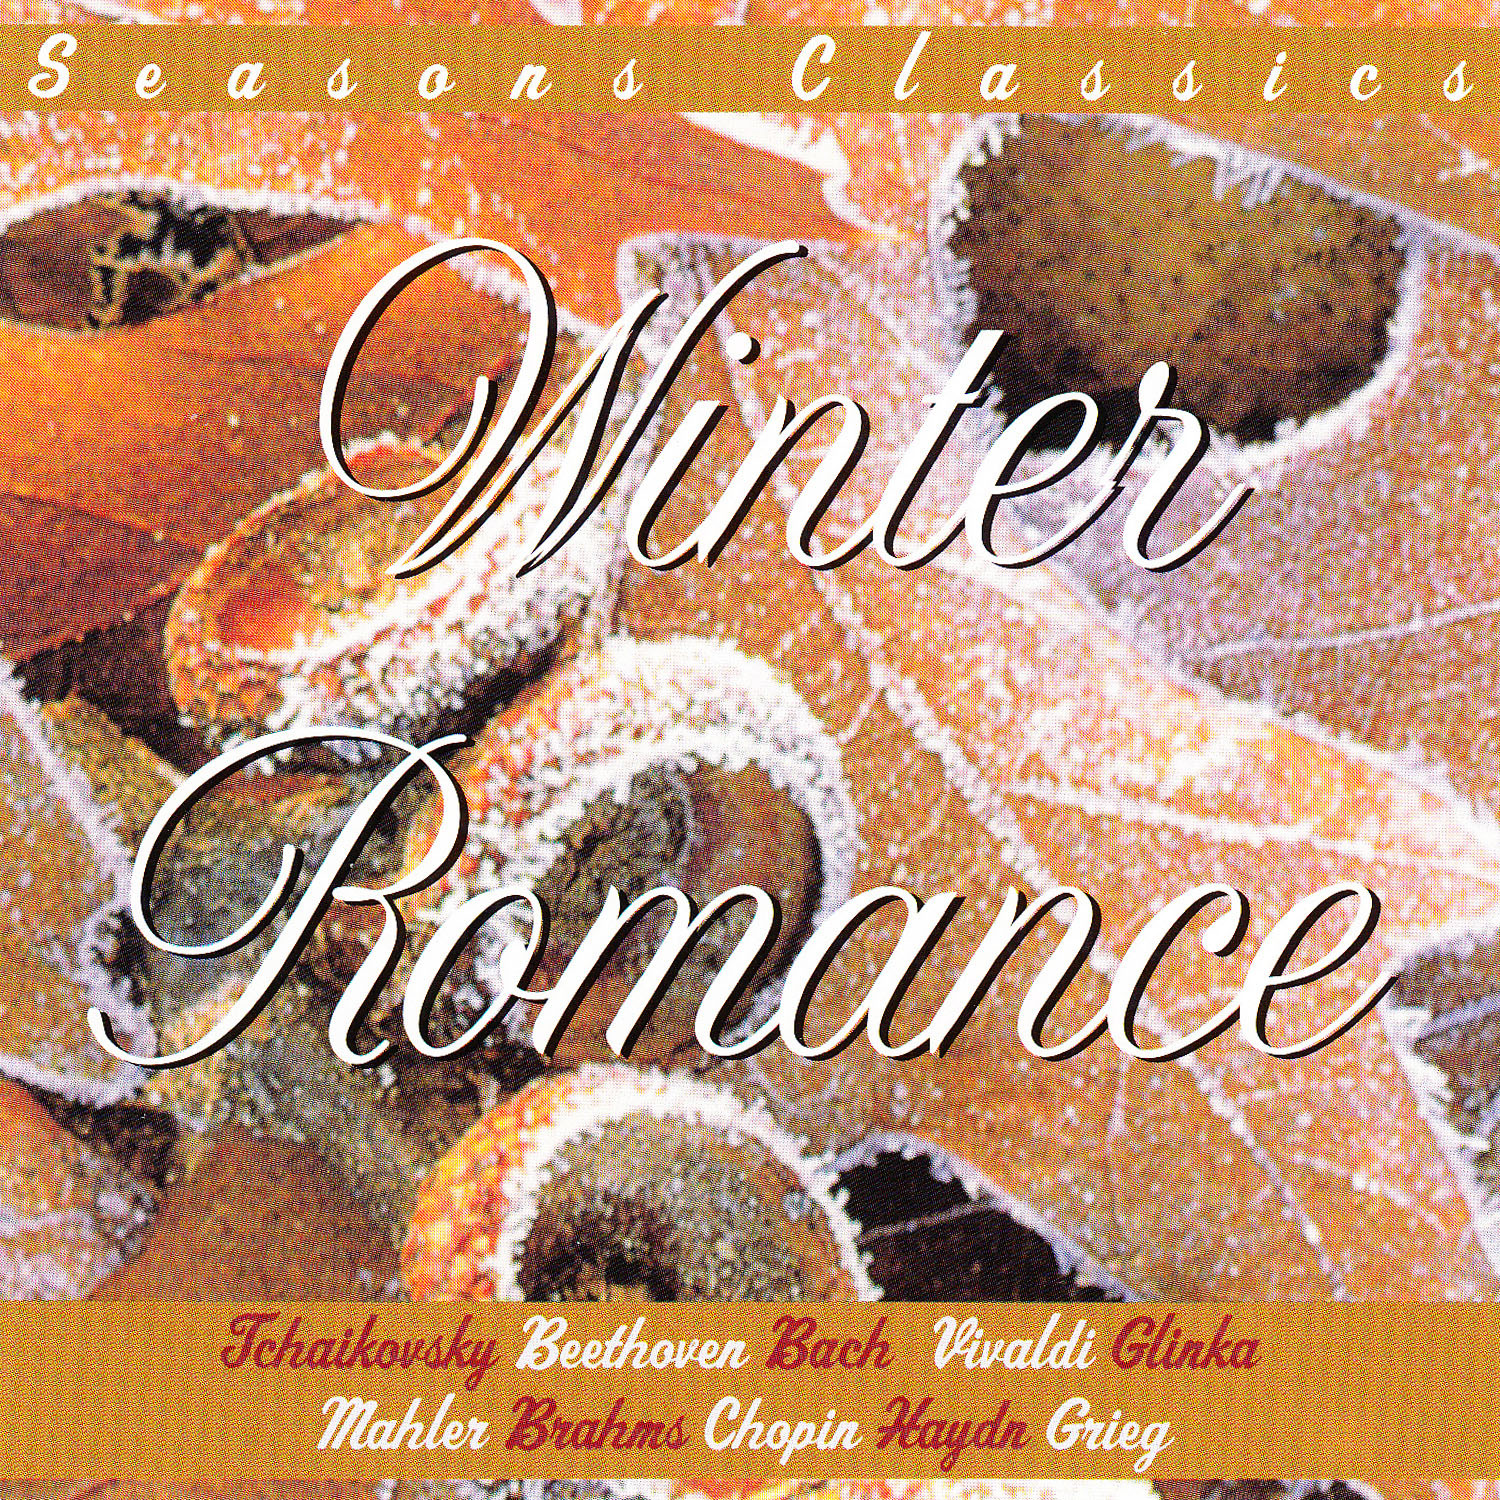 Concerto for Violin and Strings, Op. 8: Four Seasons No. 4 "Winter" in F Minor Allegro